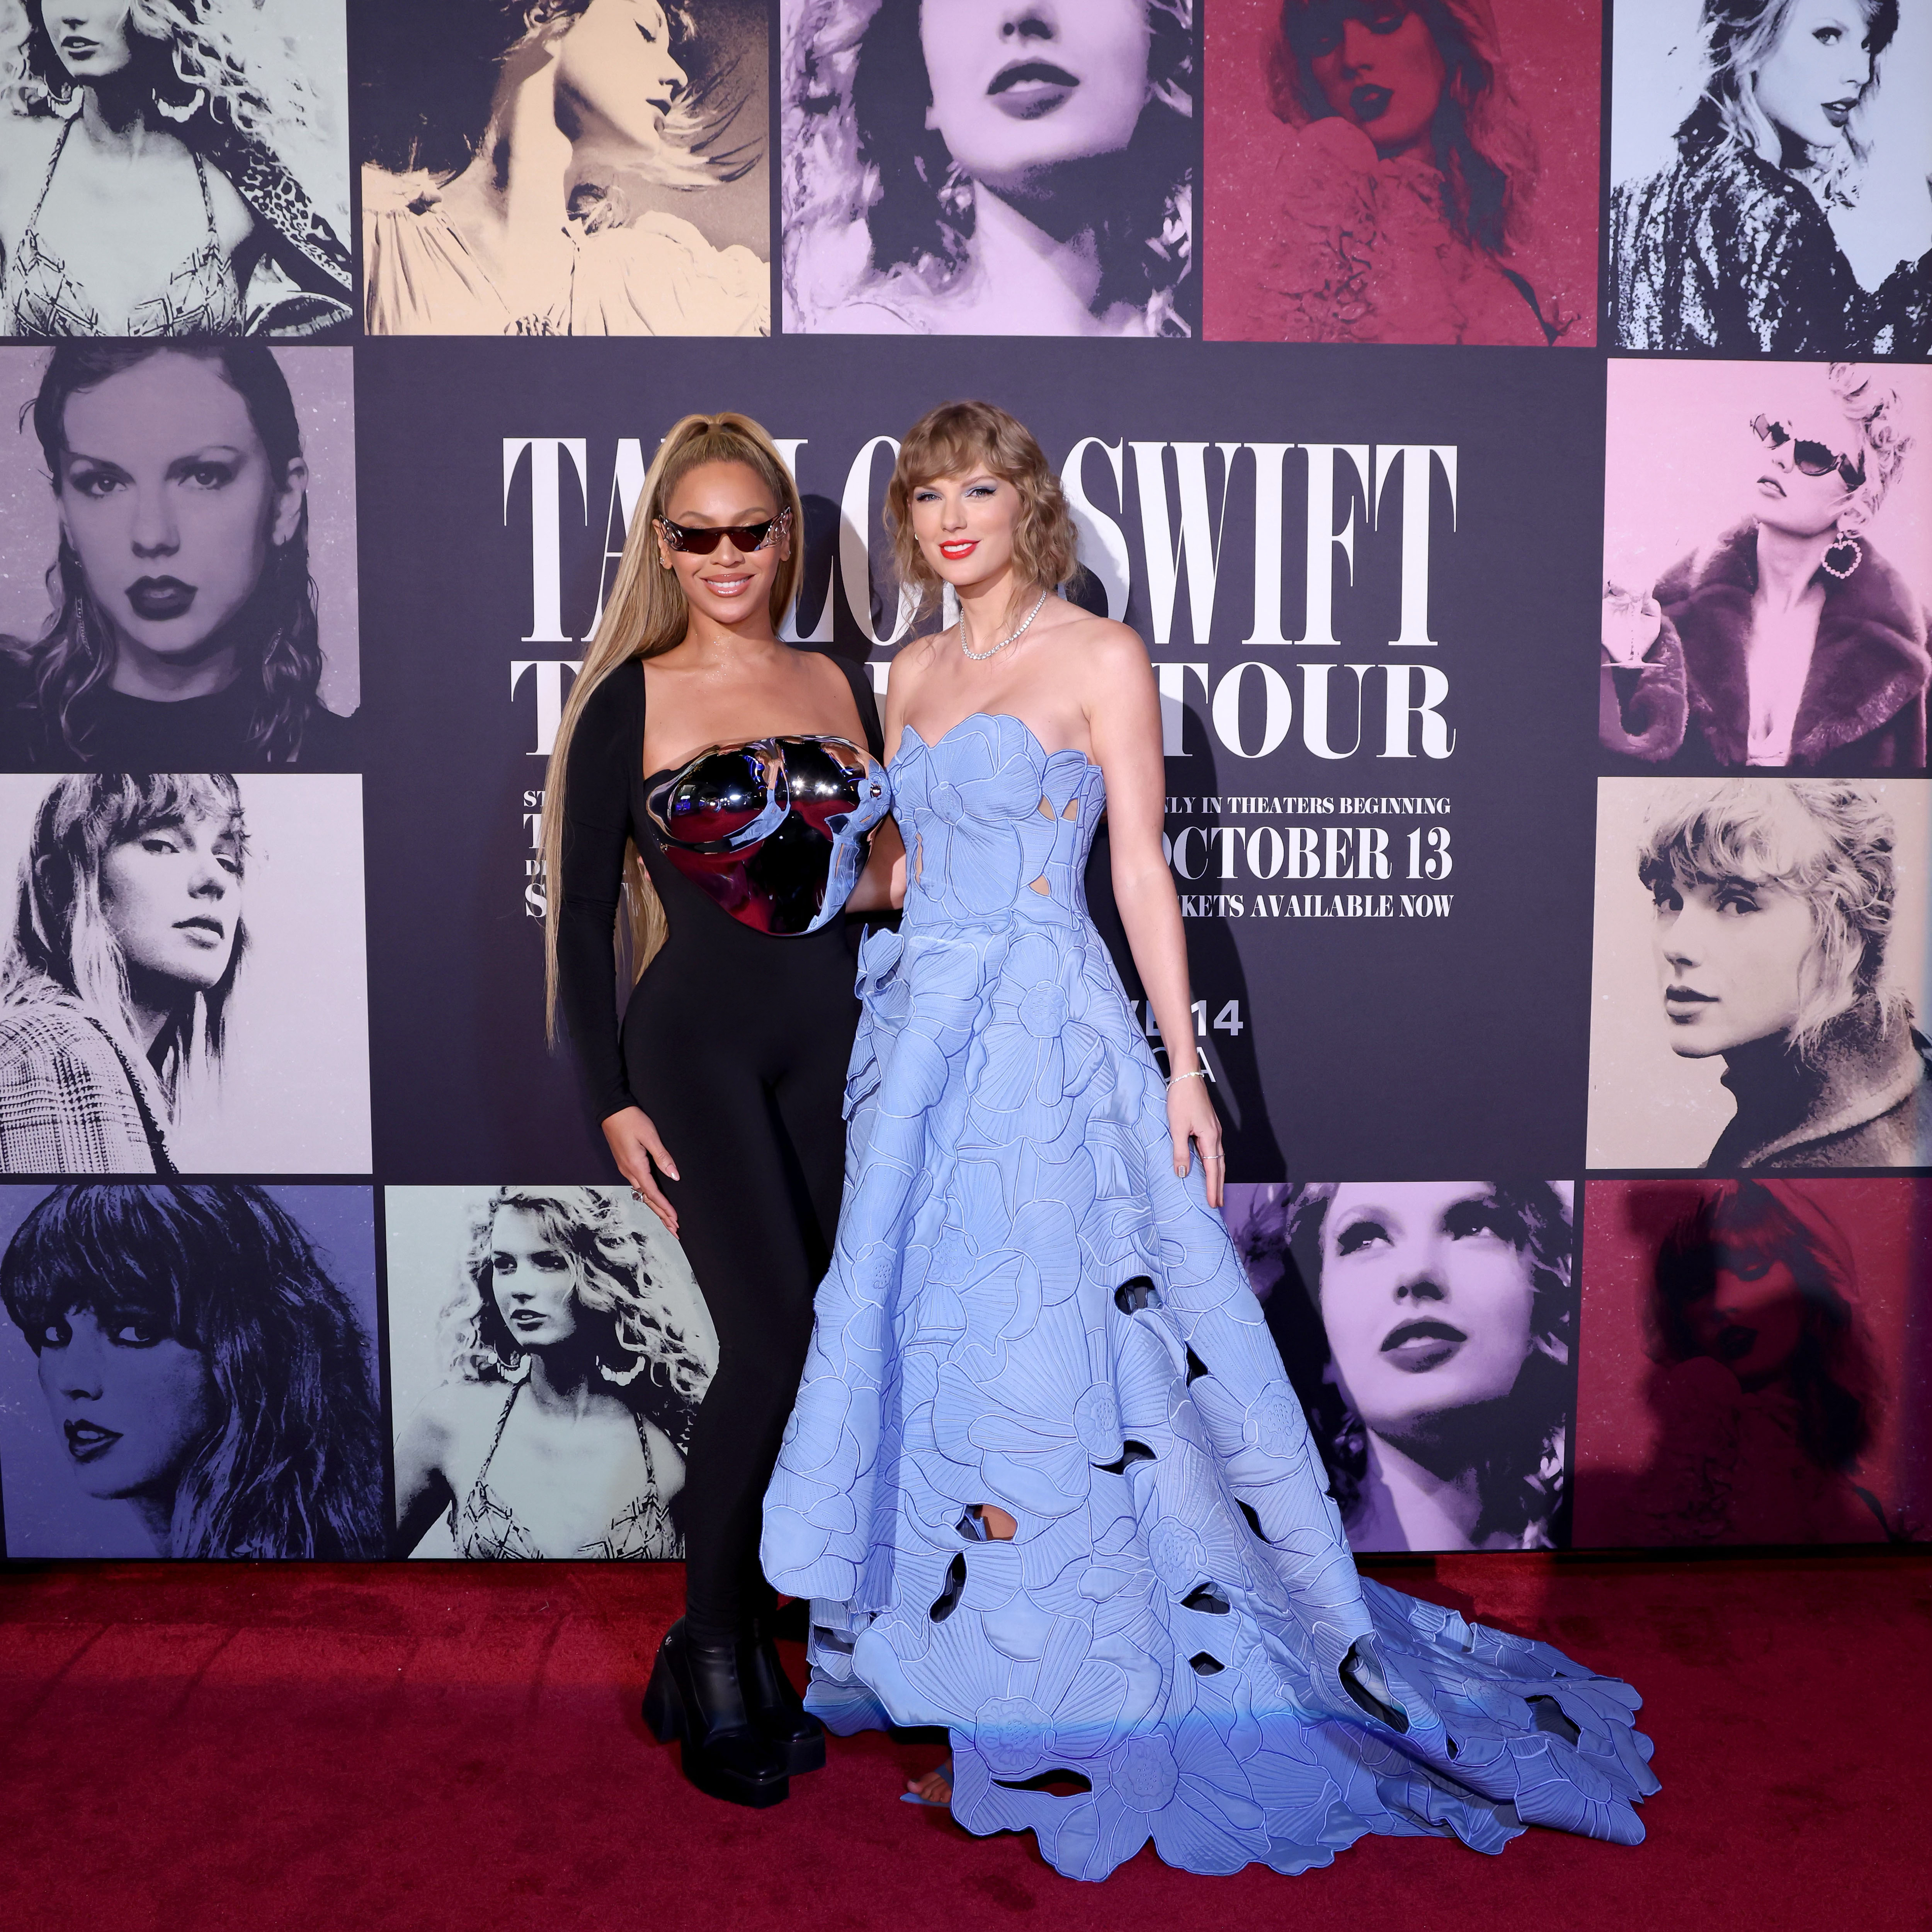 Beyoncé and Taylor on the red carpet